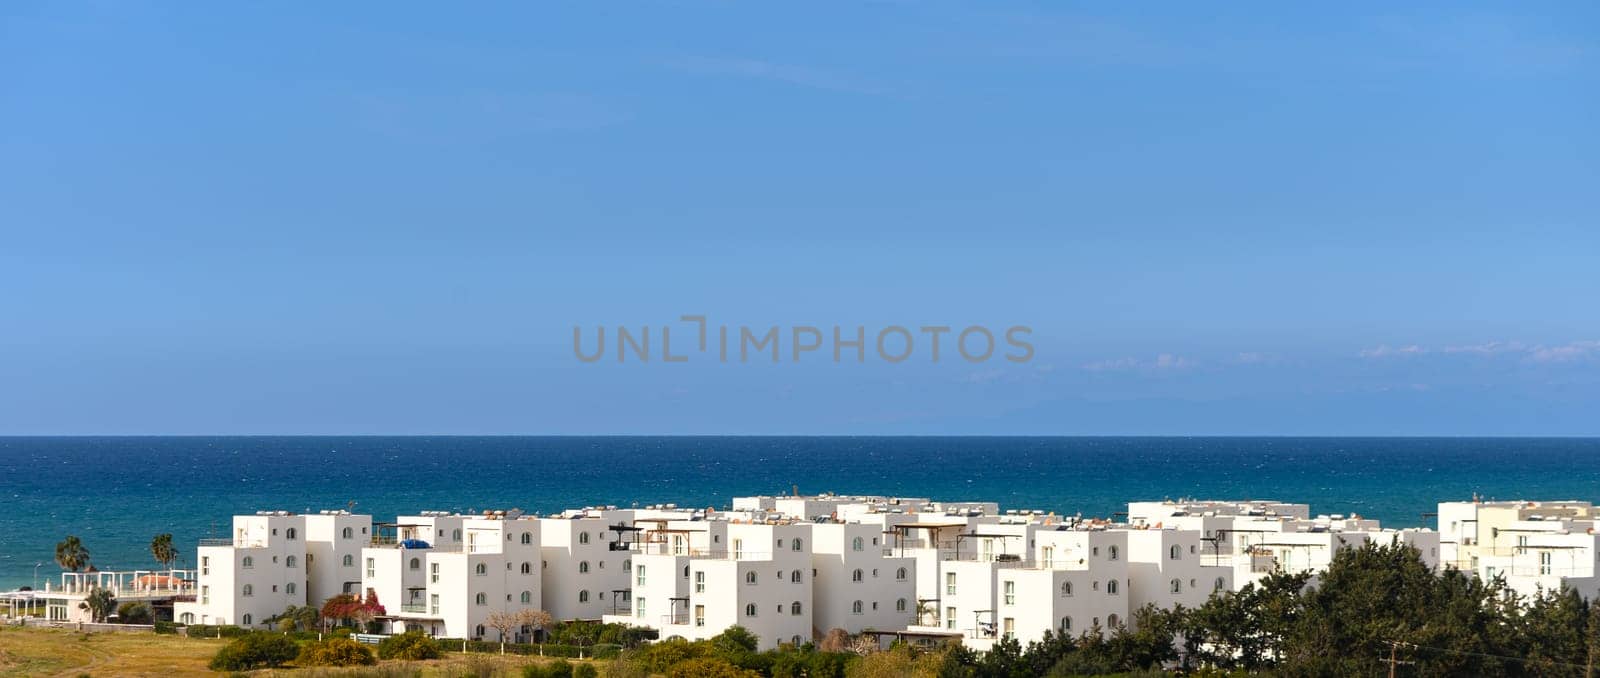 Traditional mediterranean white house with pool on hill with stunning sea view. Summer vacation background. by Mixa74